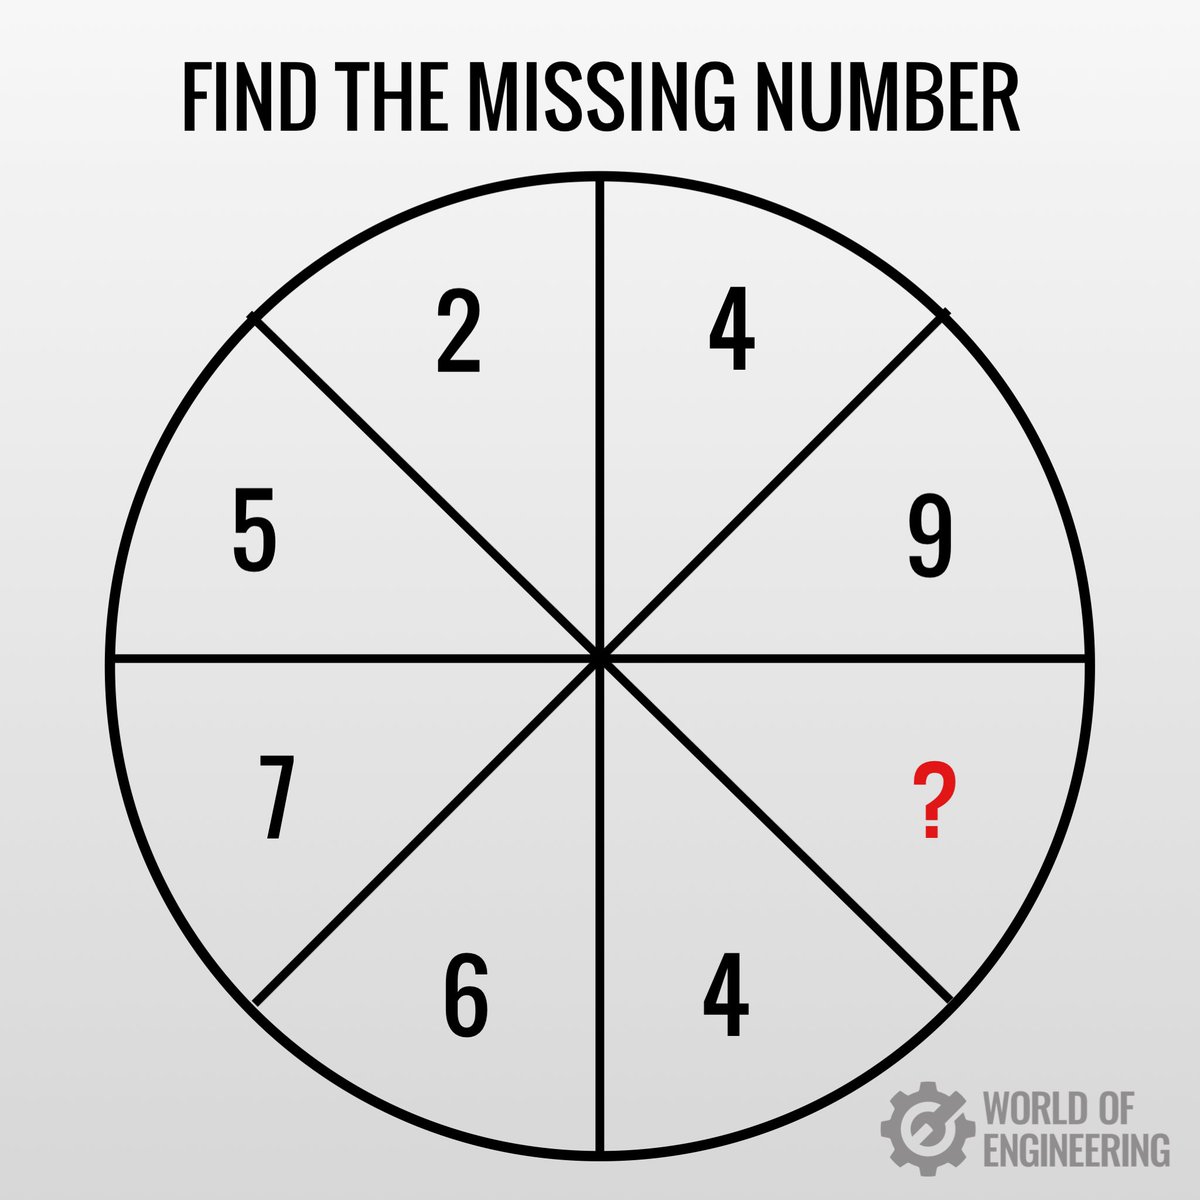 Mathematical puzzle. Find the missing number.